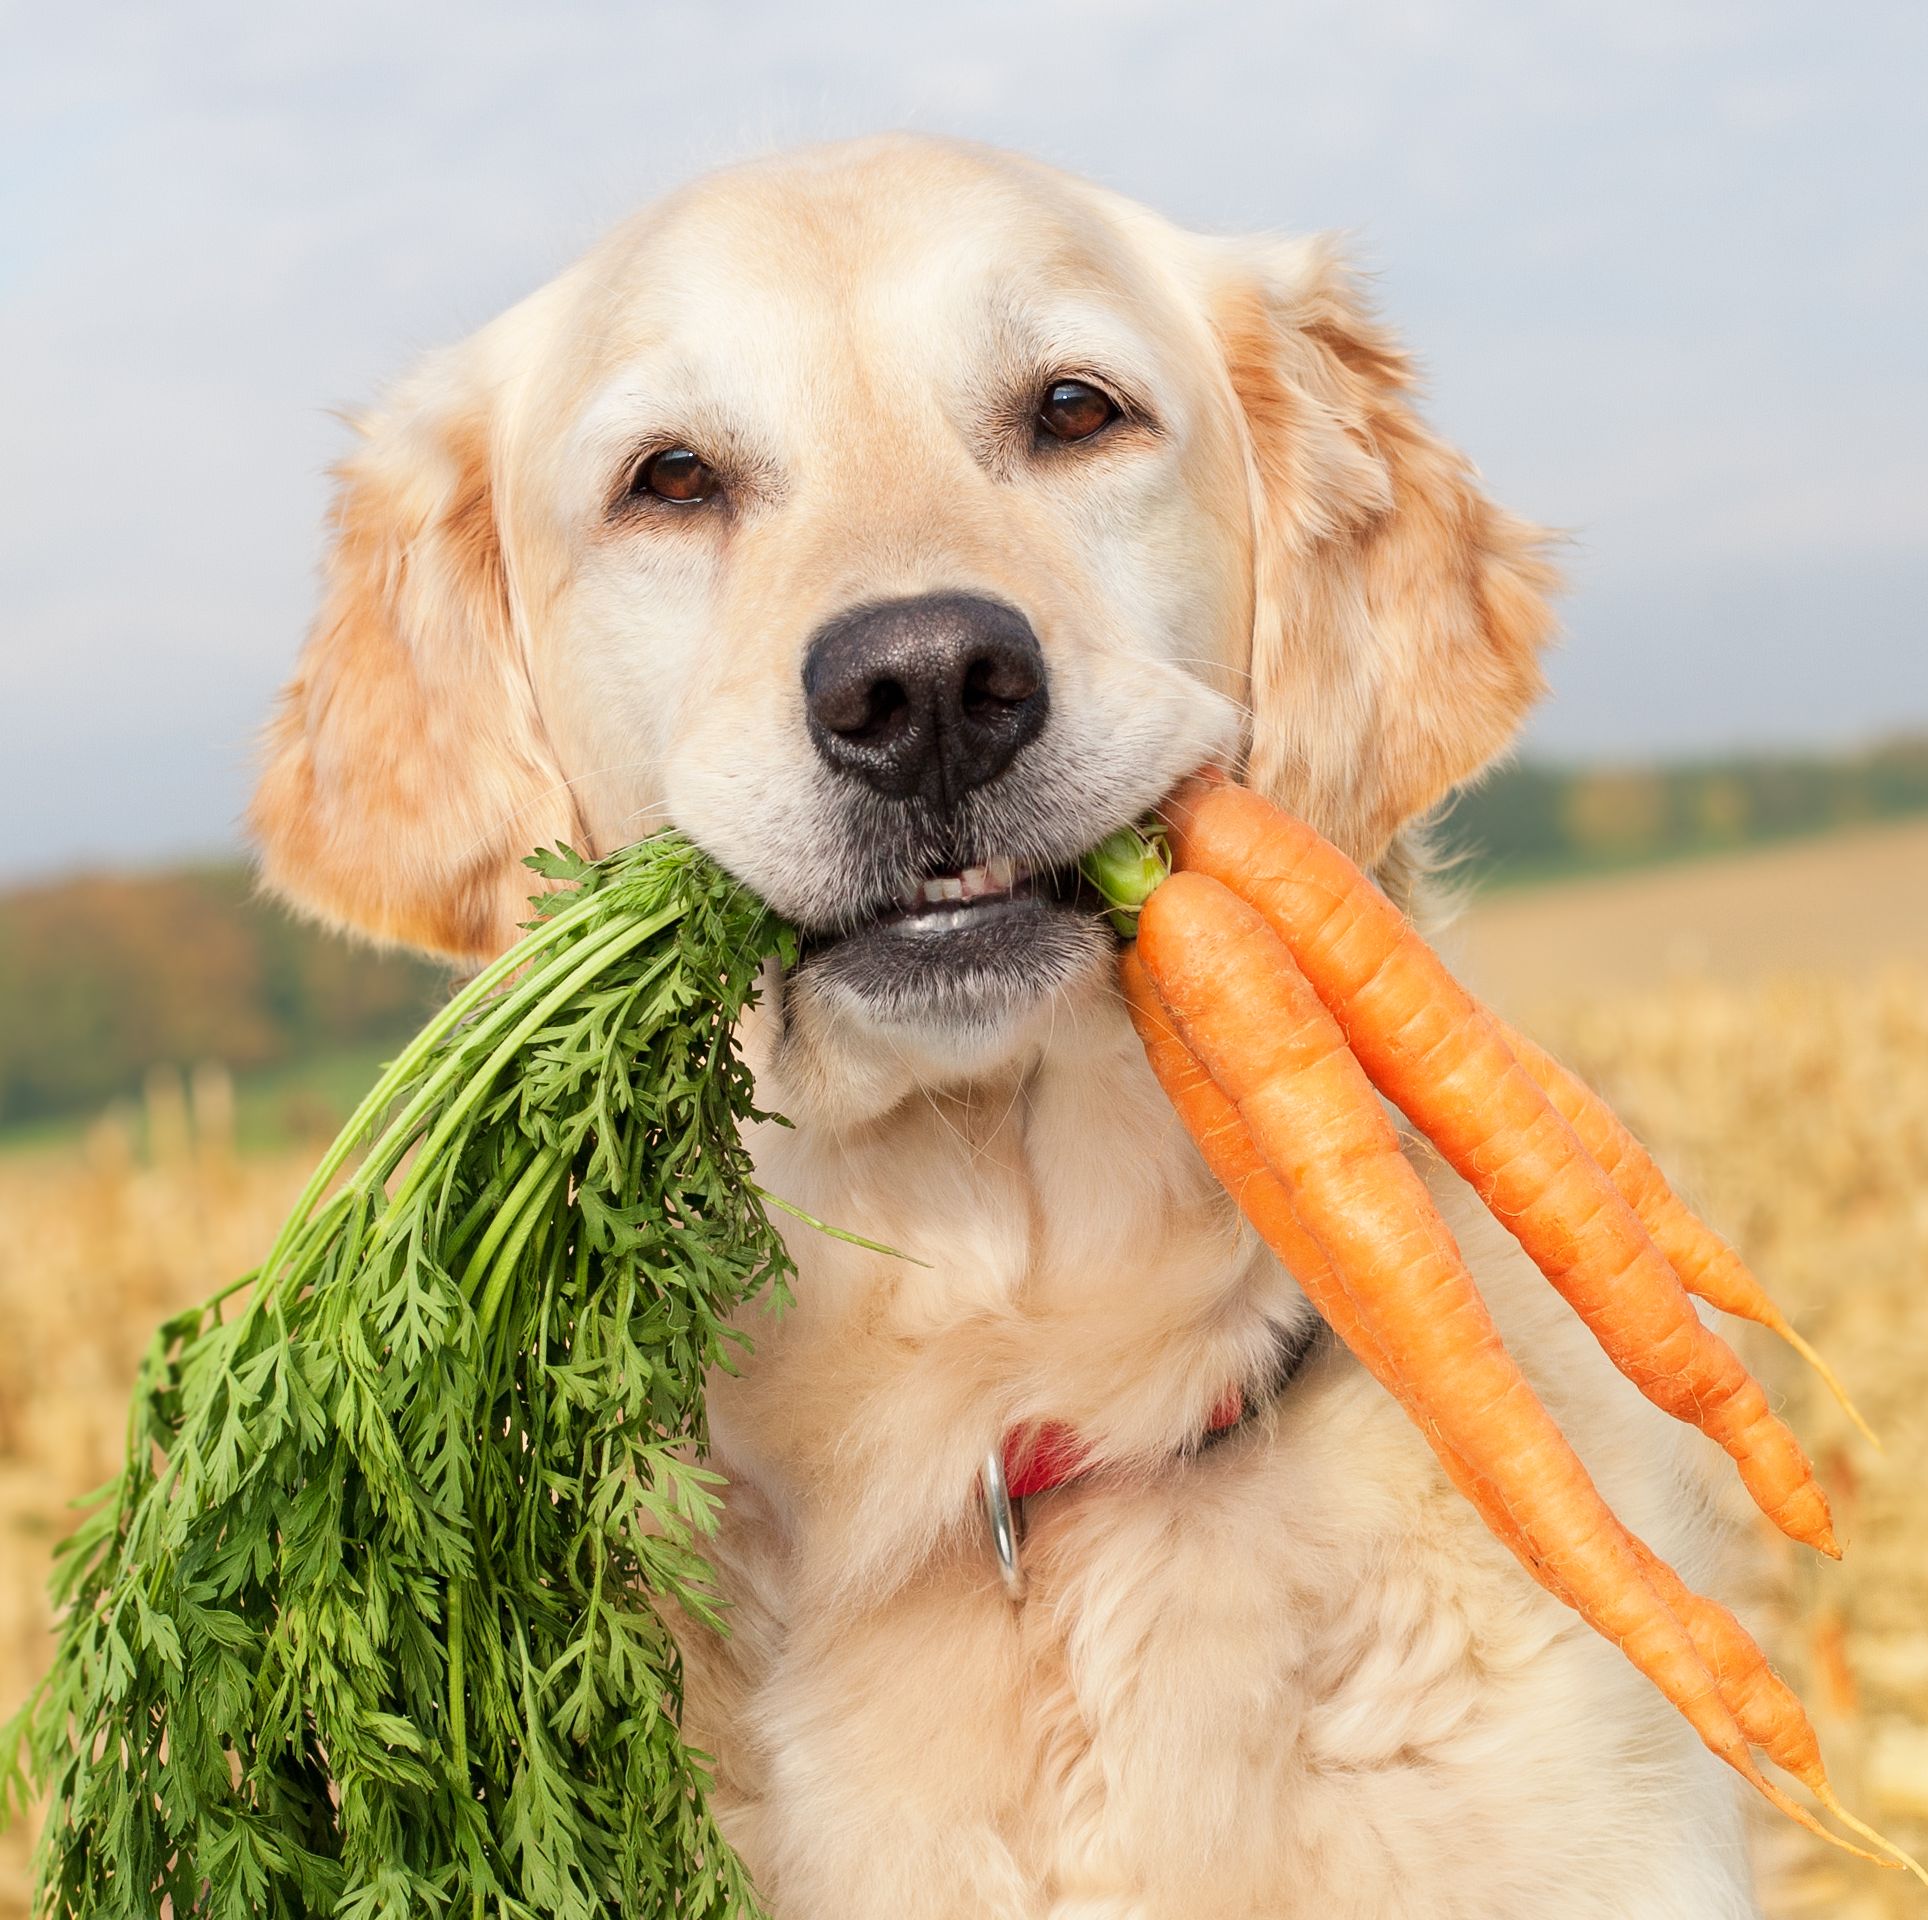 Dog eating a carrot on a field